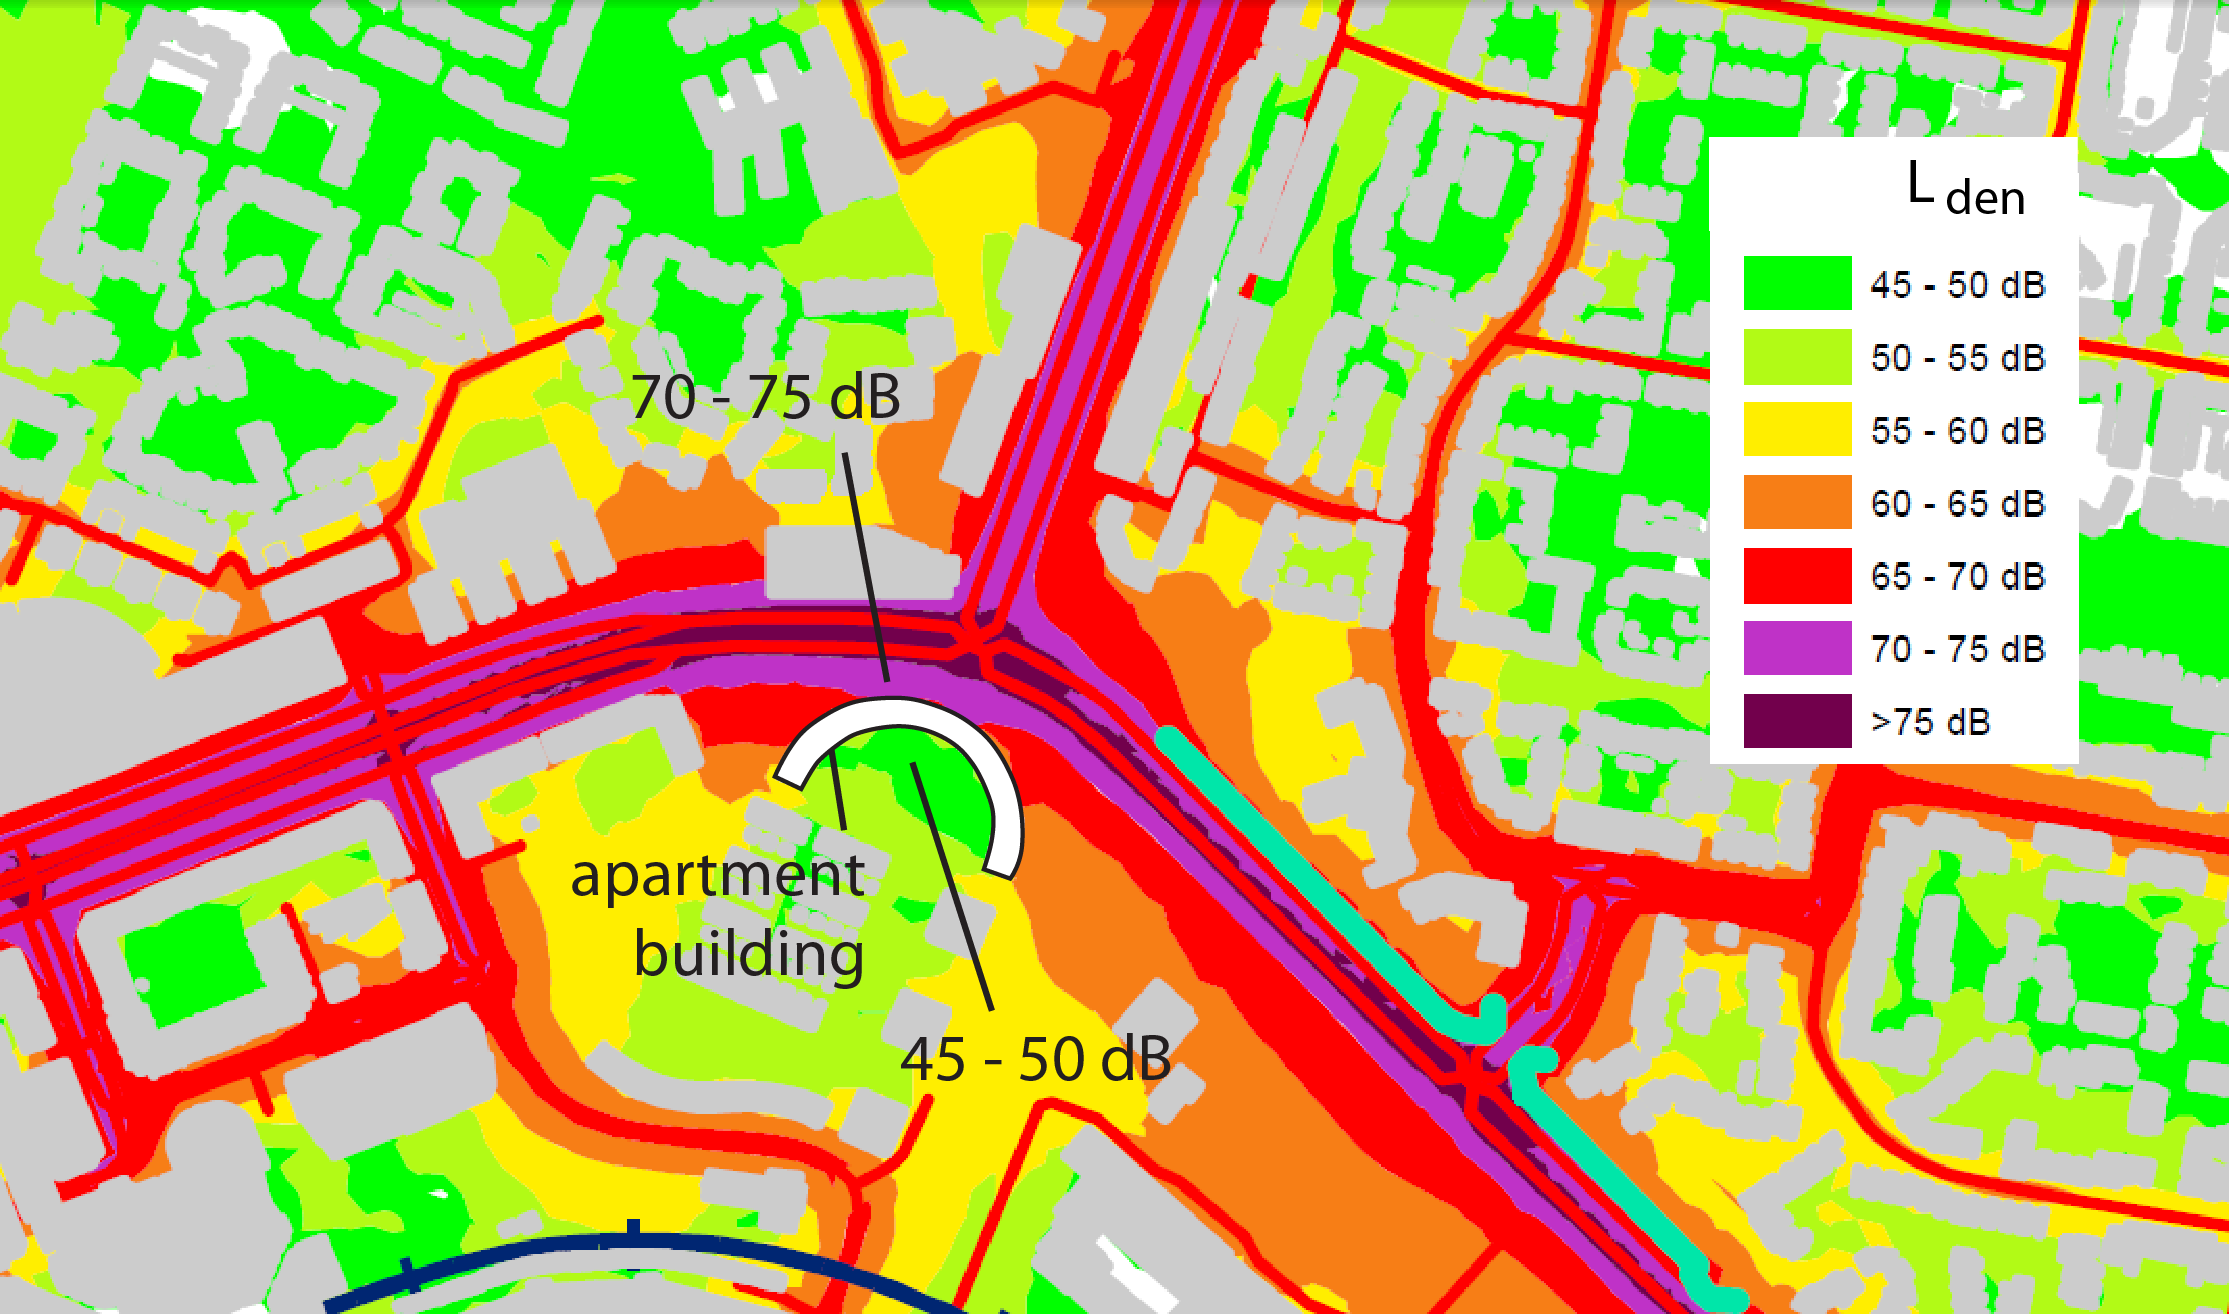 Figure 1. Traffic noise map of a part of Zoetermeer, the Netherlands.